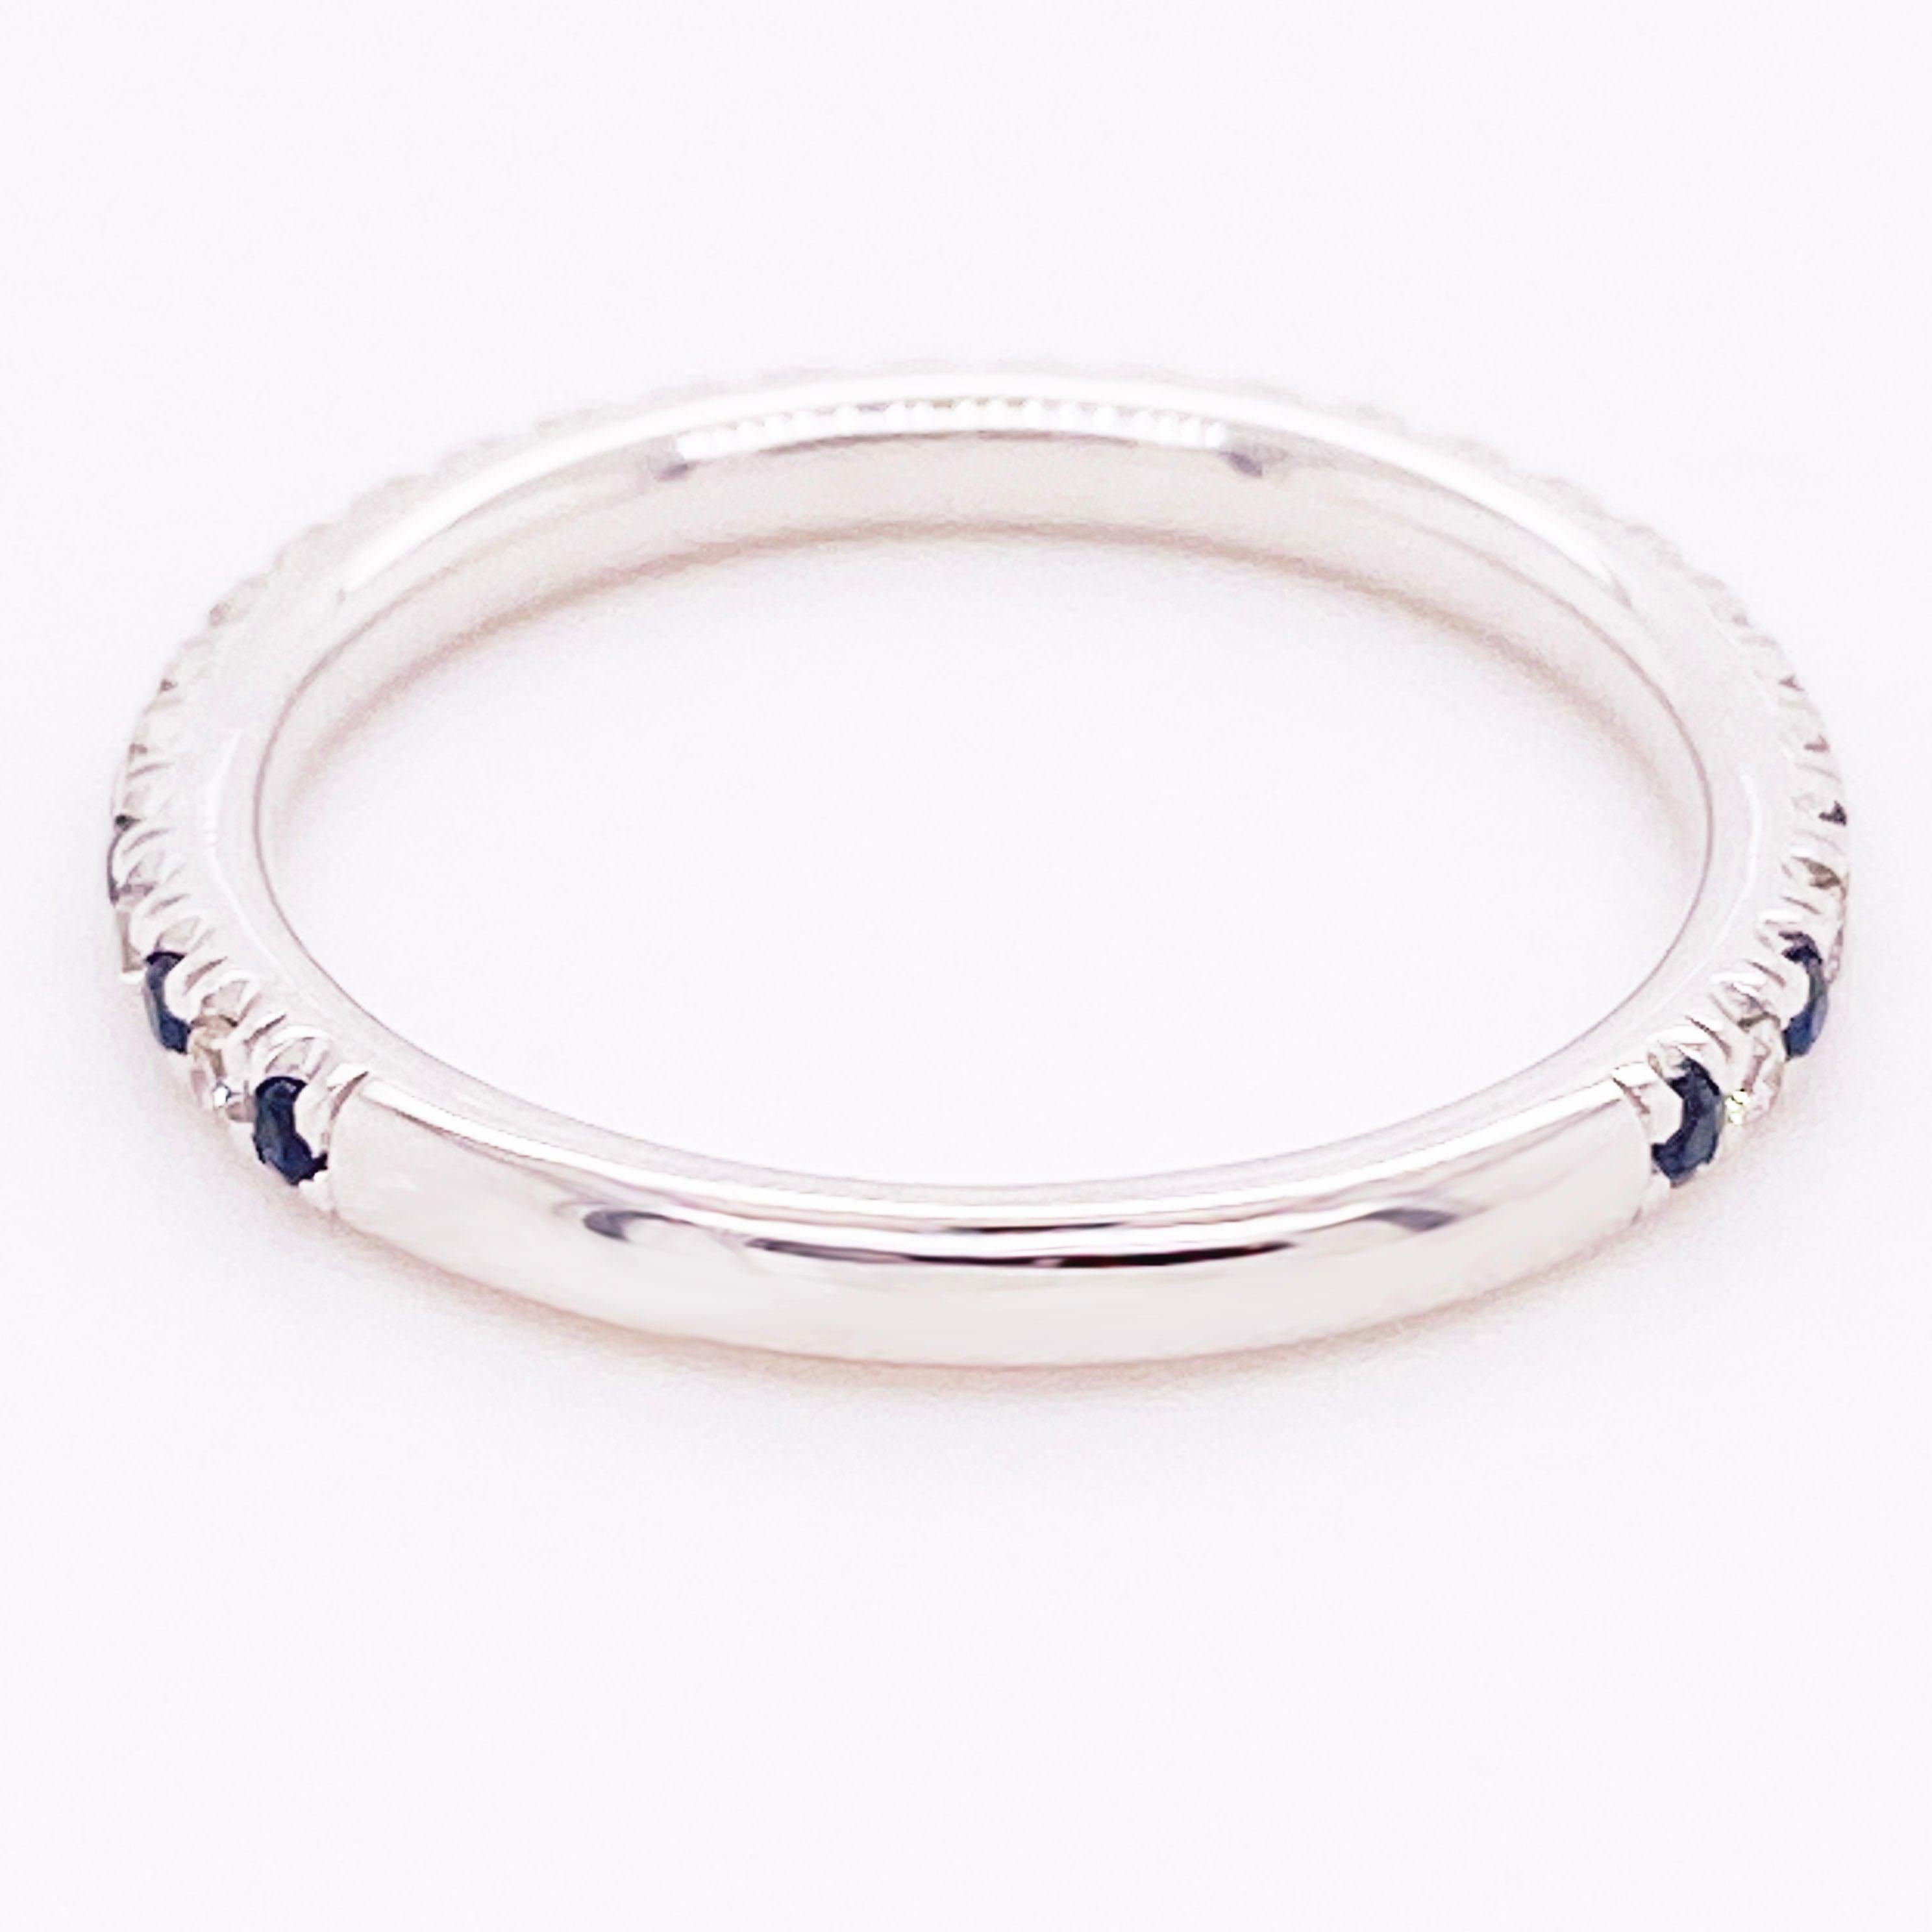 For Sale:  Sapphire Diamond Ring, Blue Sapphire, 14 Kt White Gold, Stackable Band, Classic 6